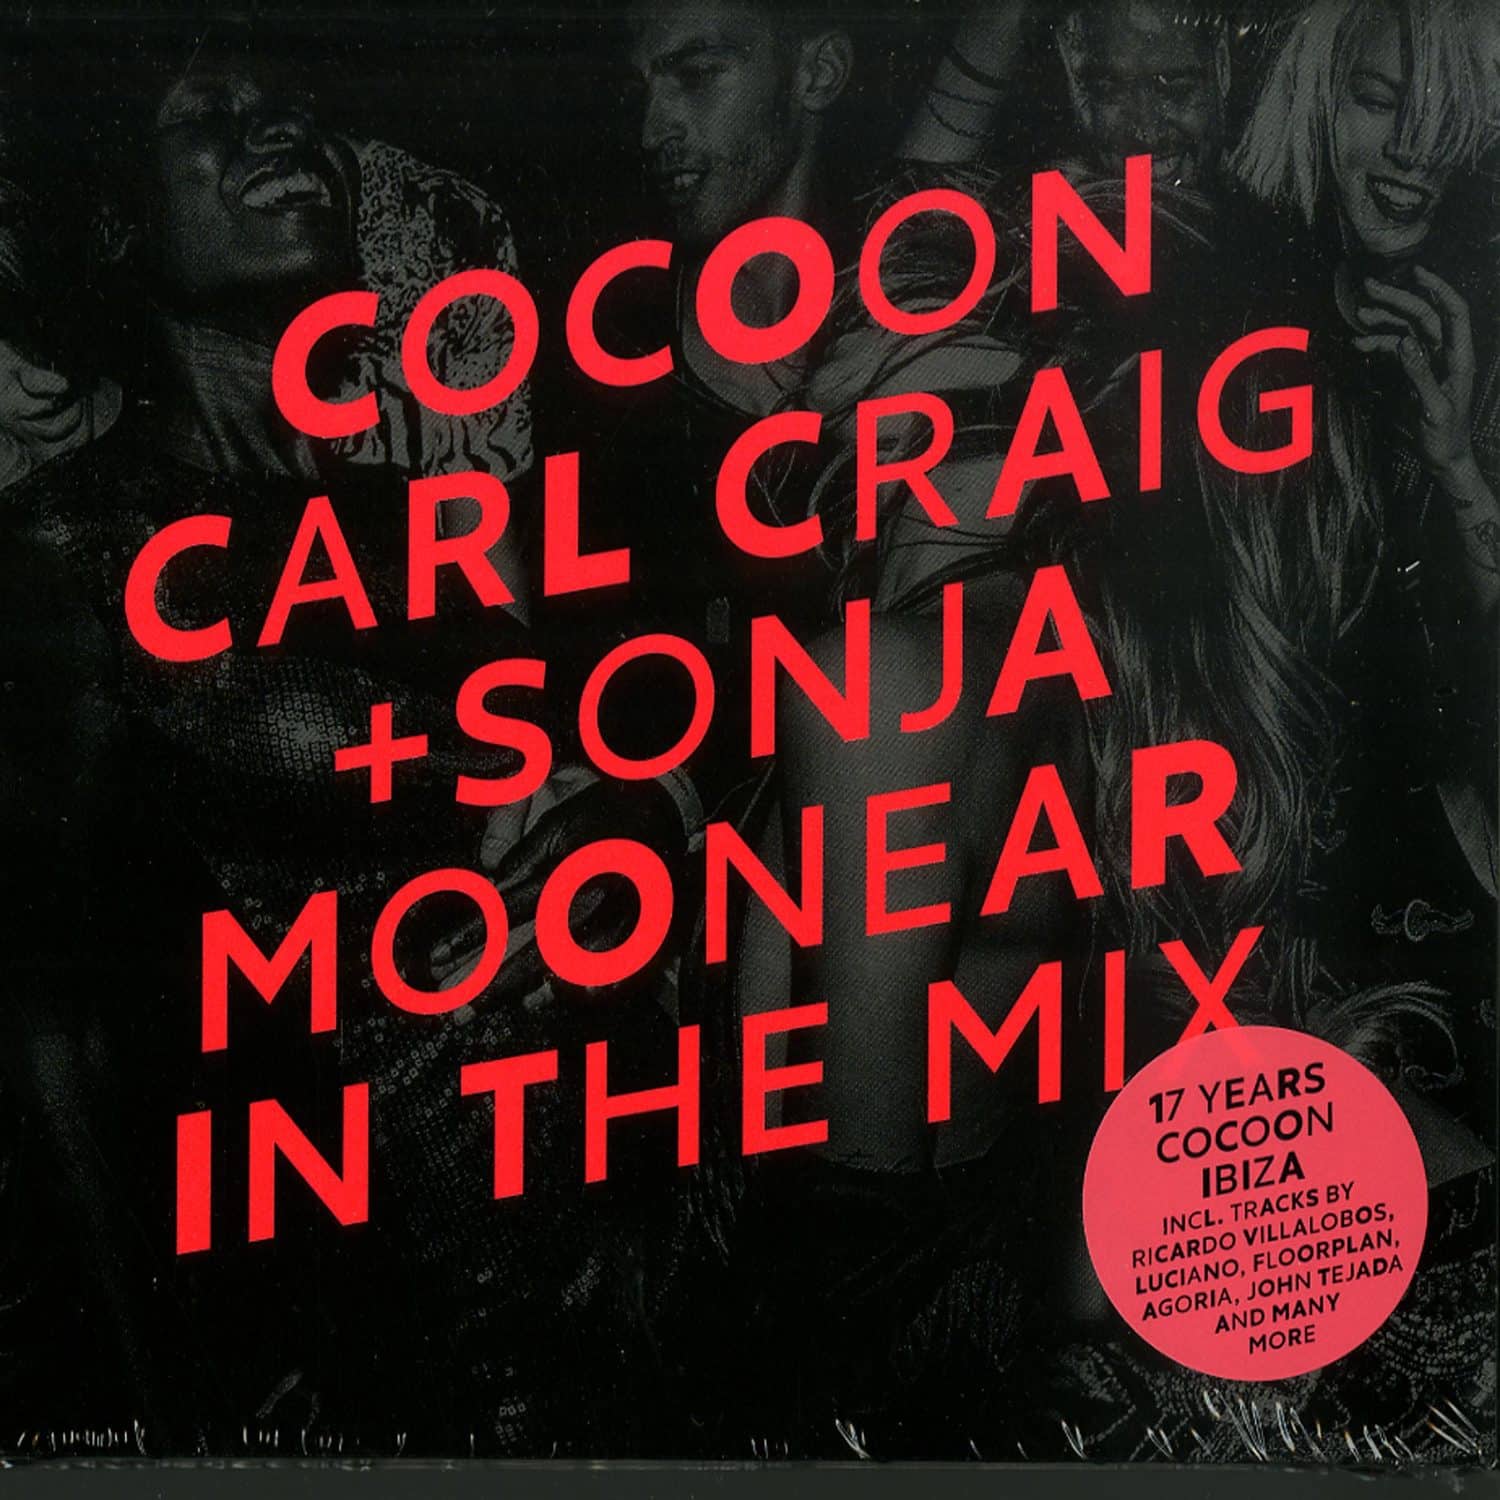 Various Artists - COCOON IBIZA - CARL CRAIG & SONJA MOONEAR IN THE MIX 